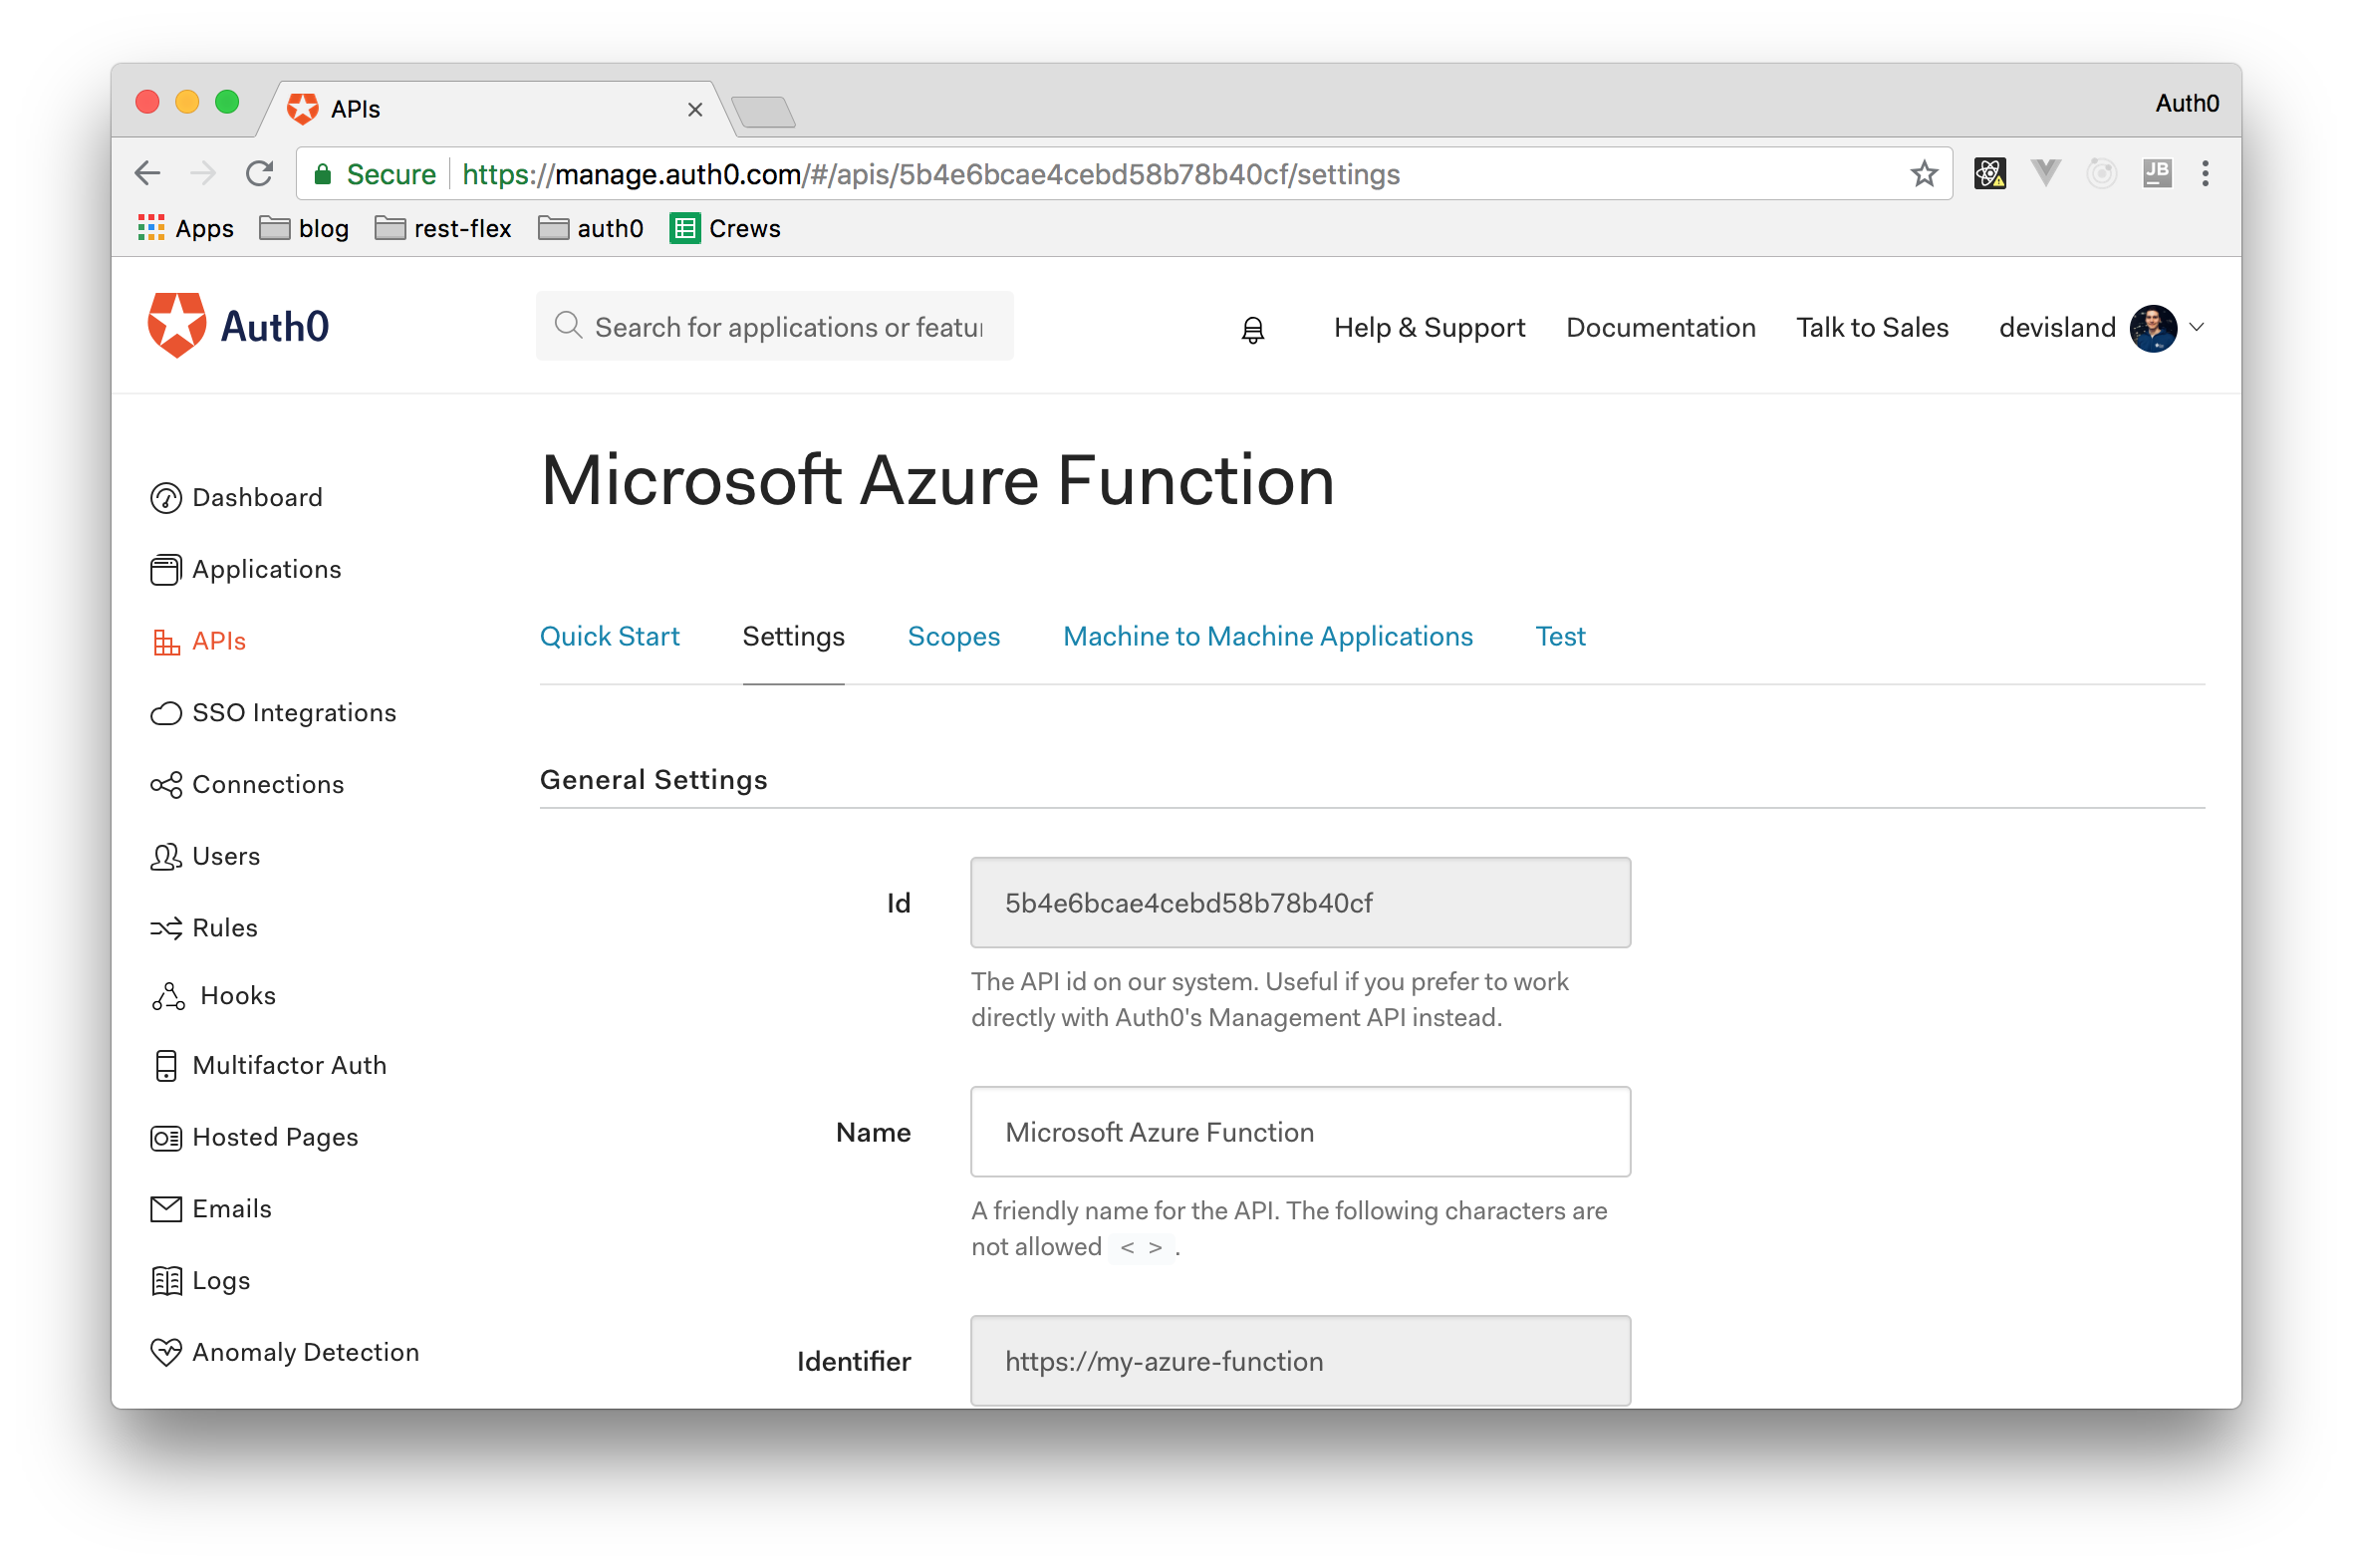 Creating an Auth0 API to represent the Azure Function